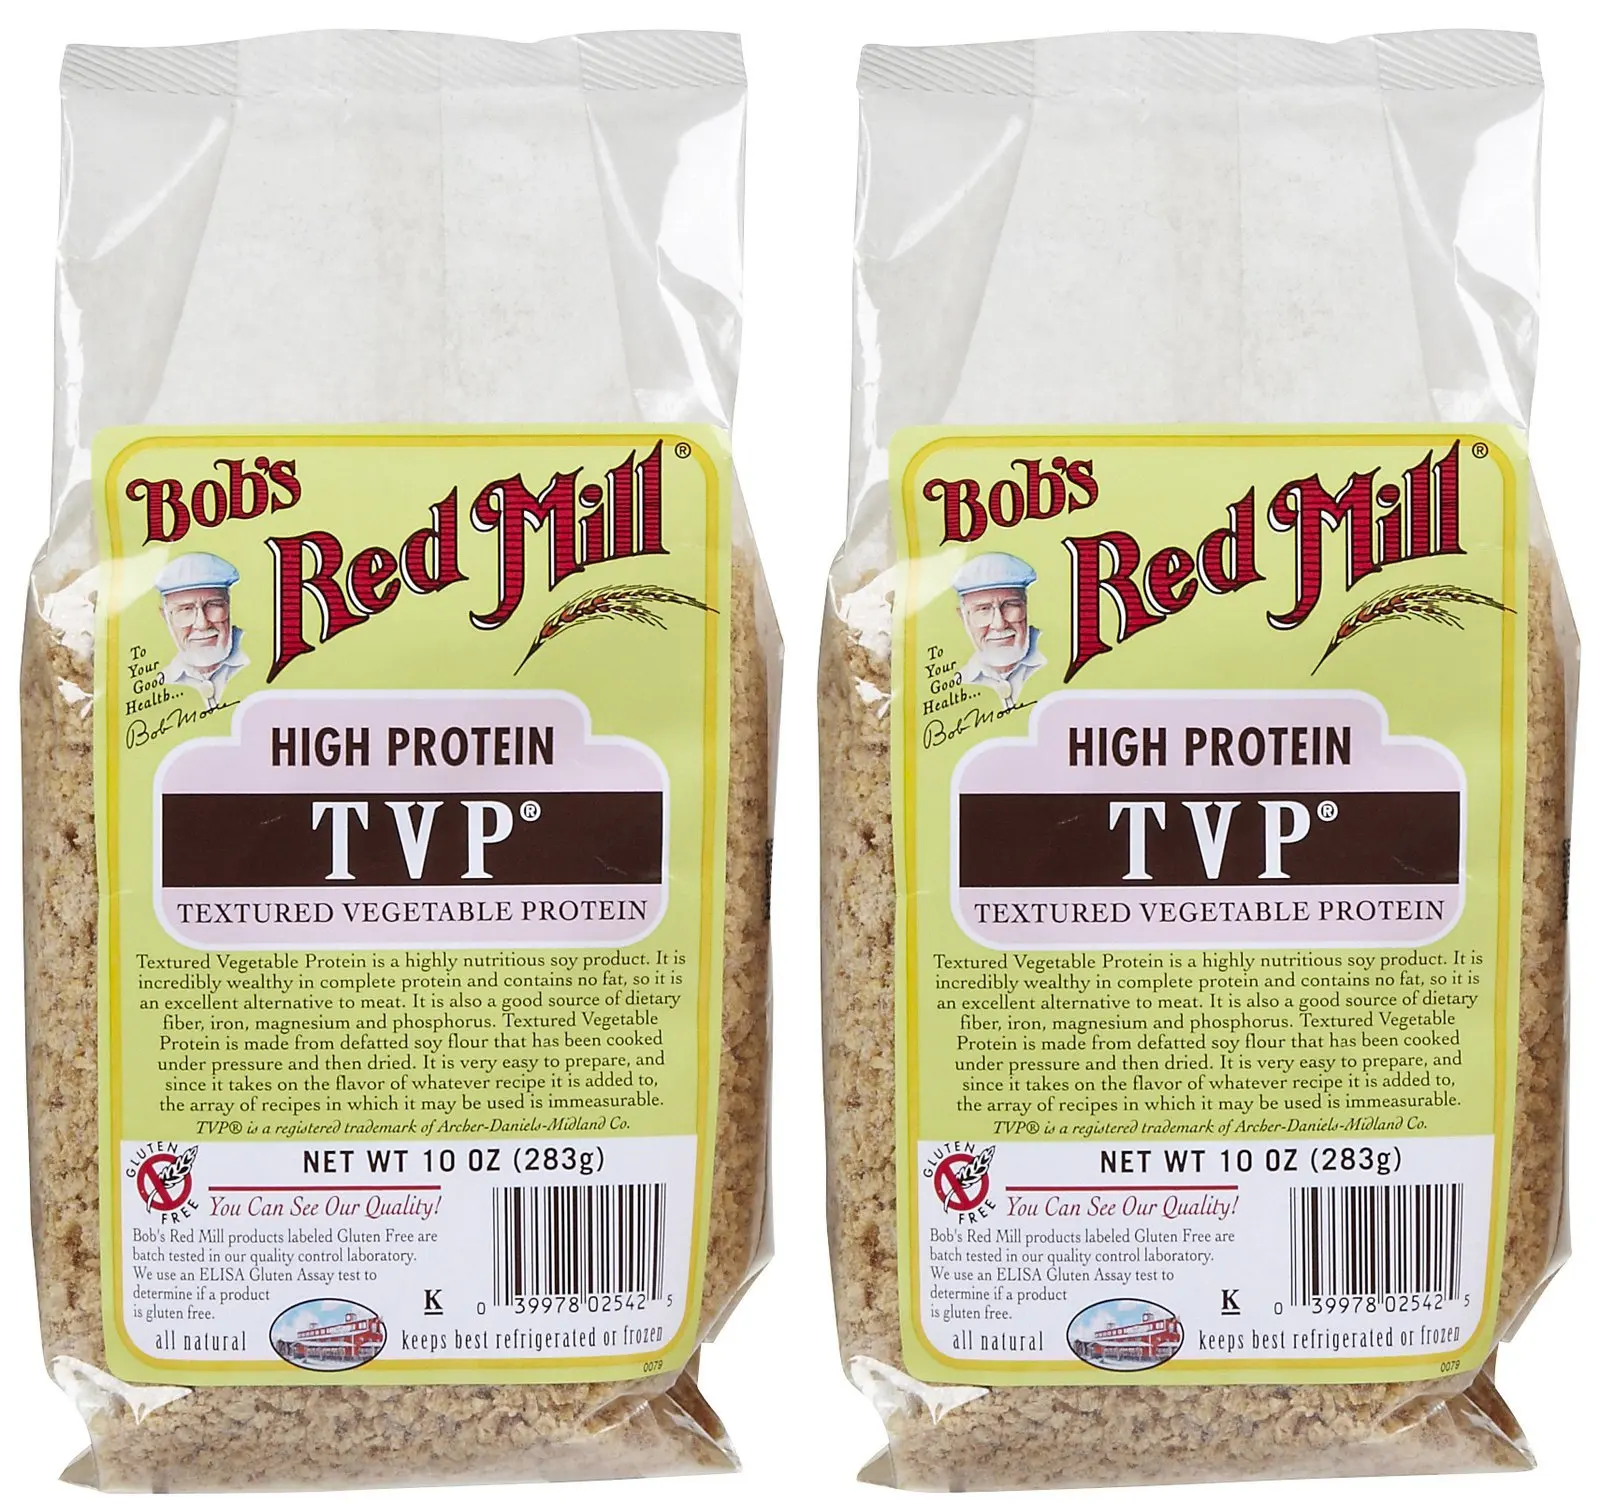 Bob's Red Mill Textured Vegetable Protein, 10 oz, 2 pk. 